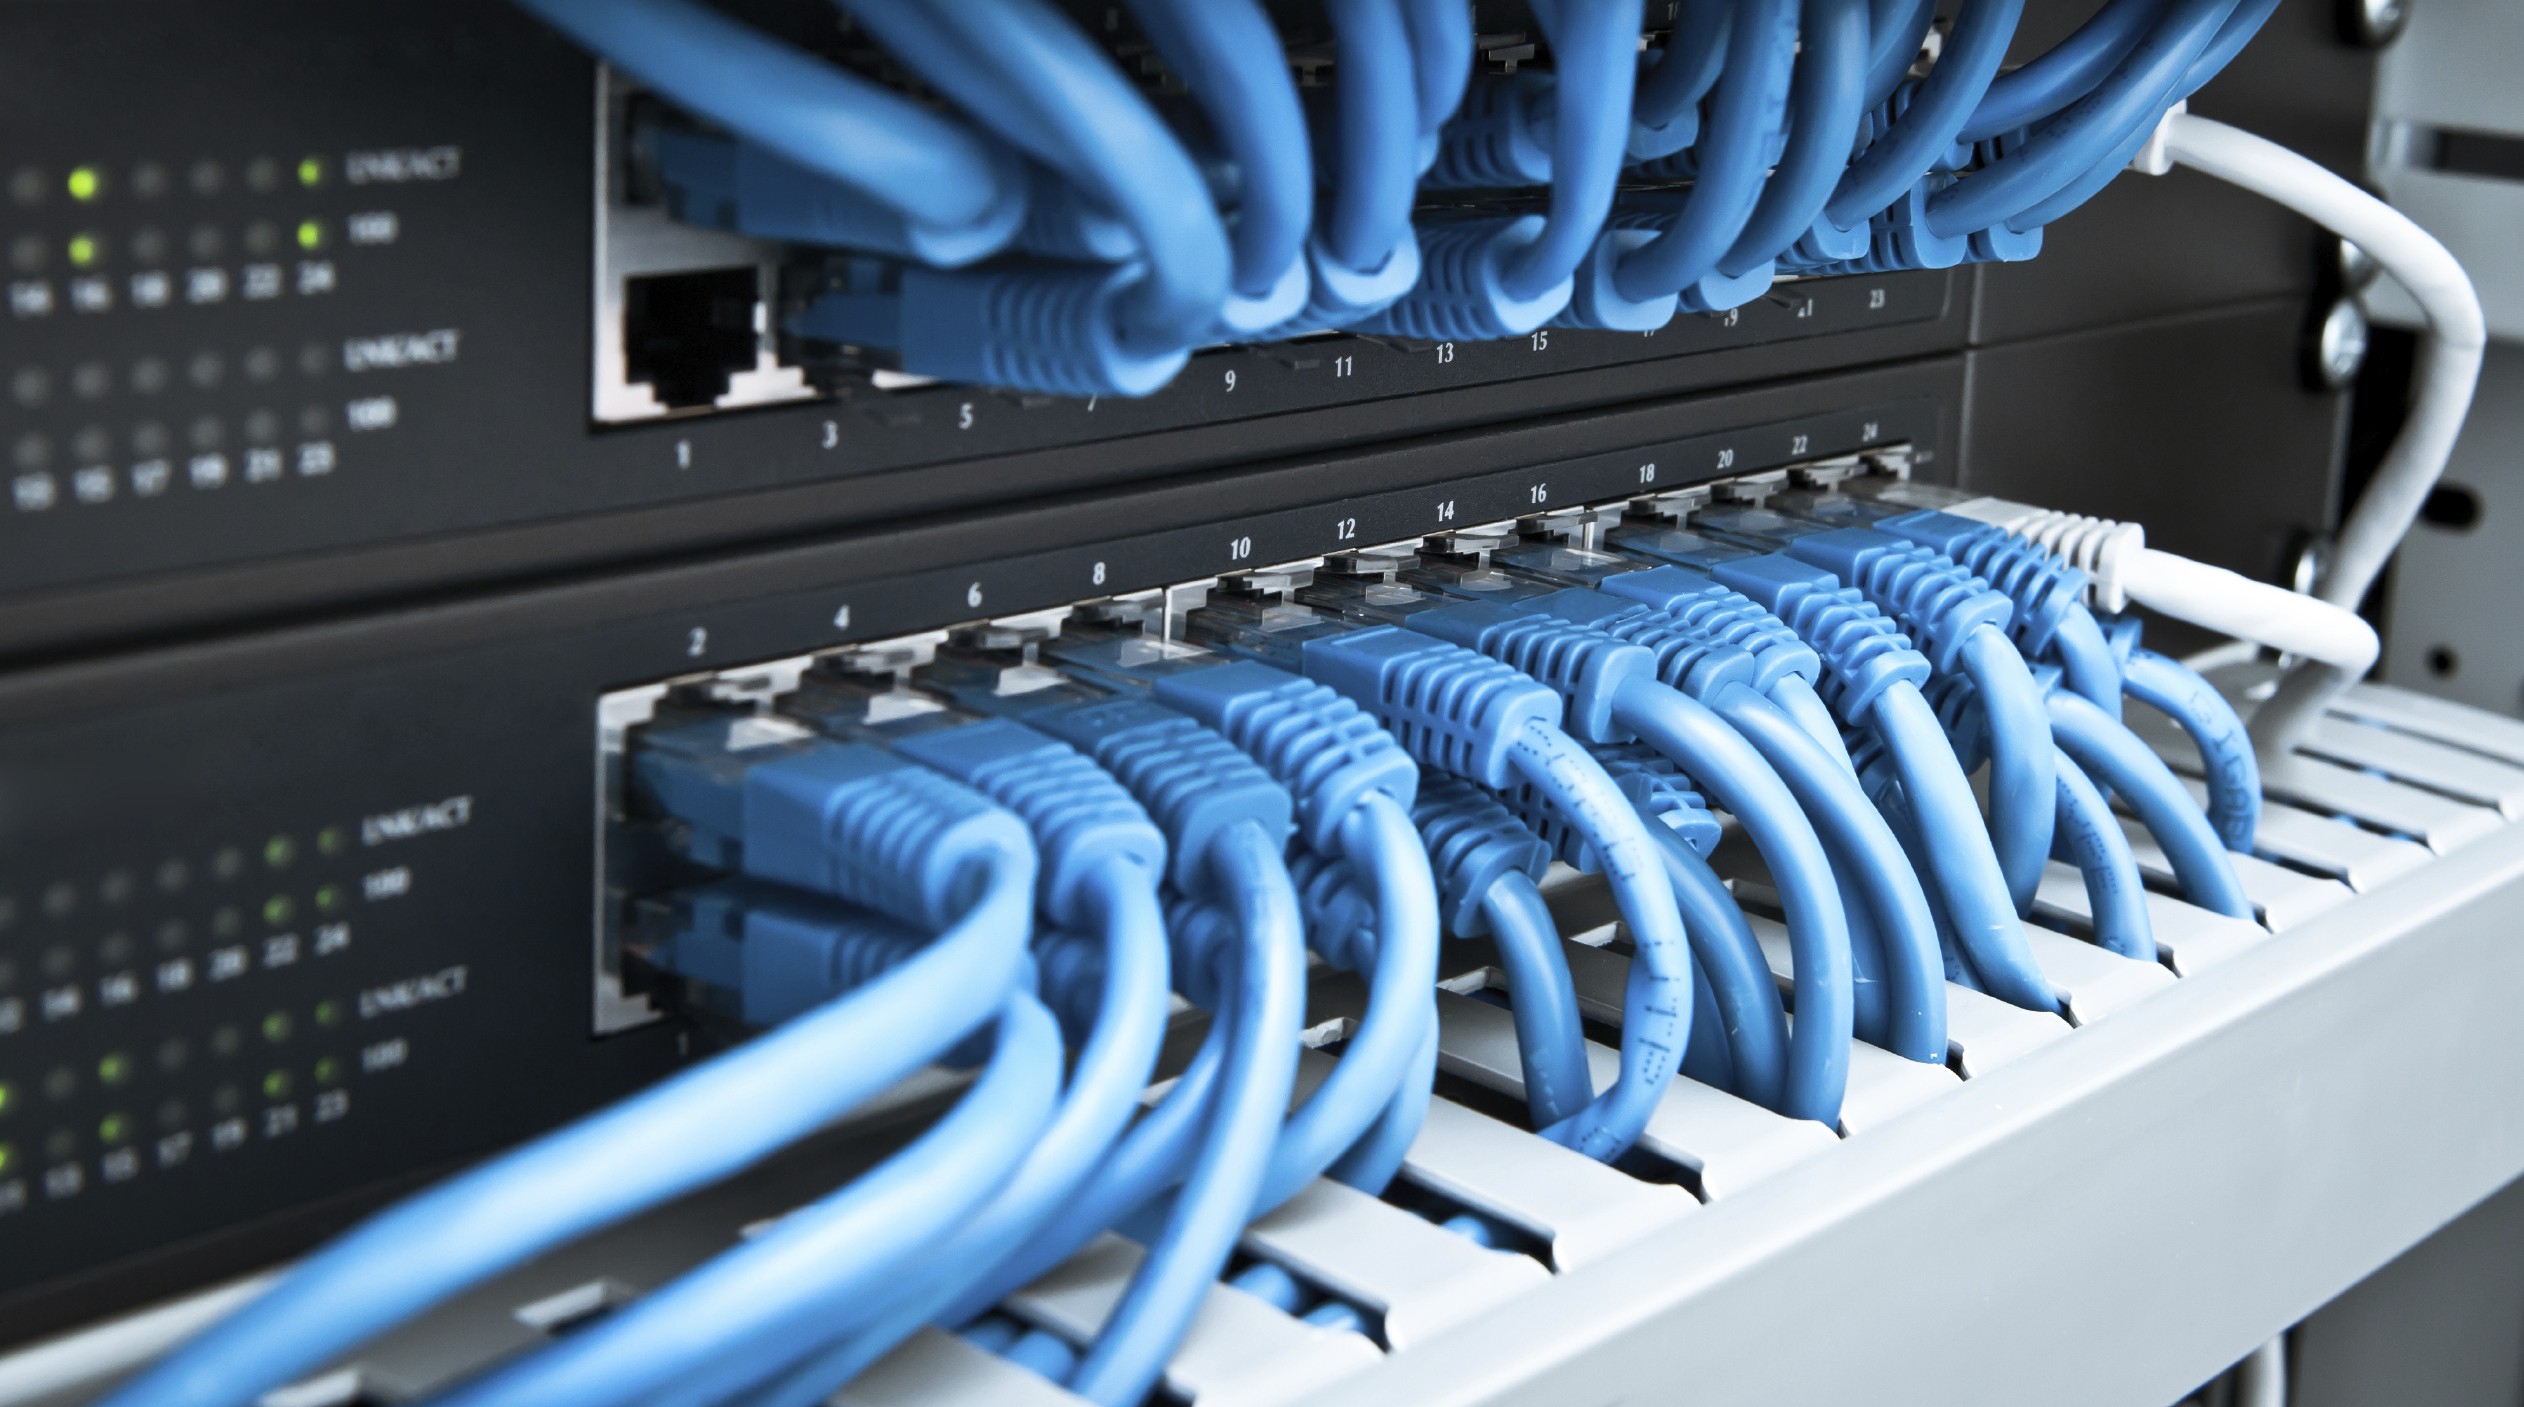 Crestwood Kentucky Preferred Voice & Data Network Cabling Solutions